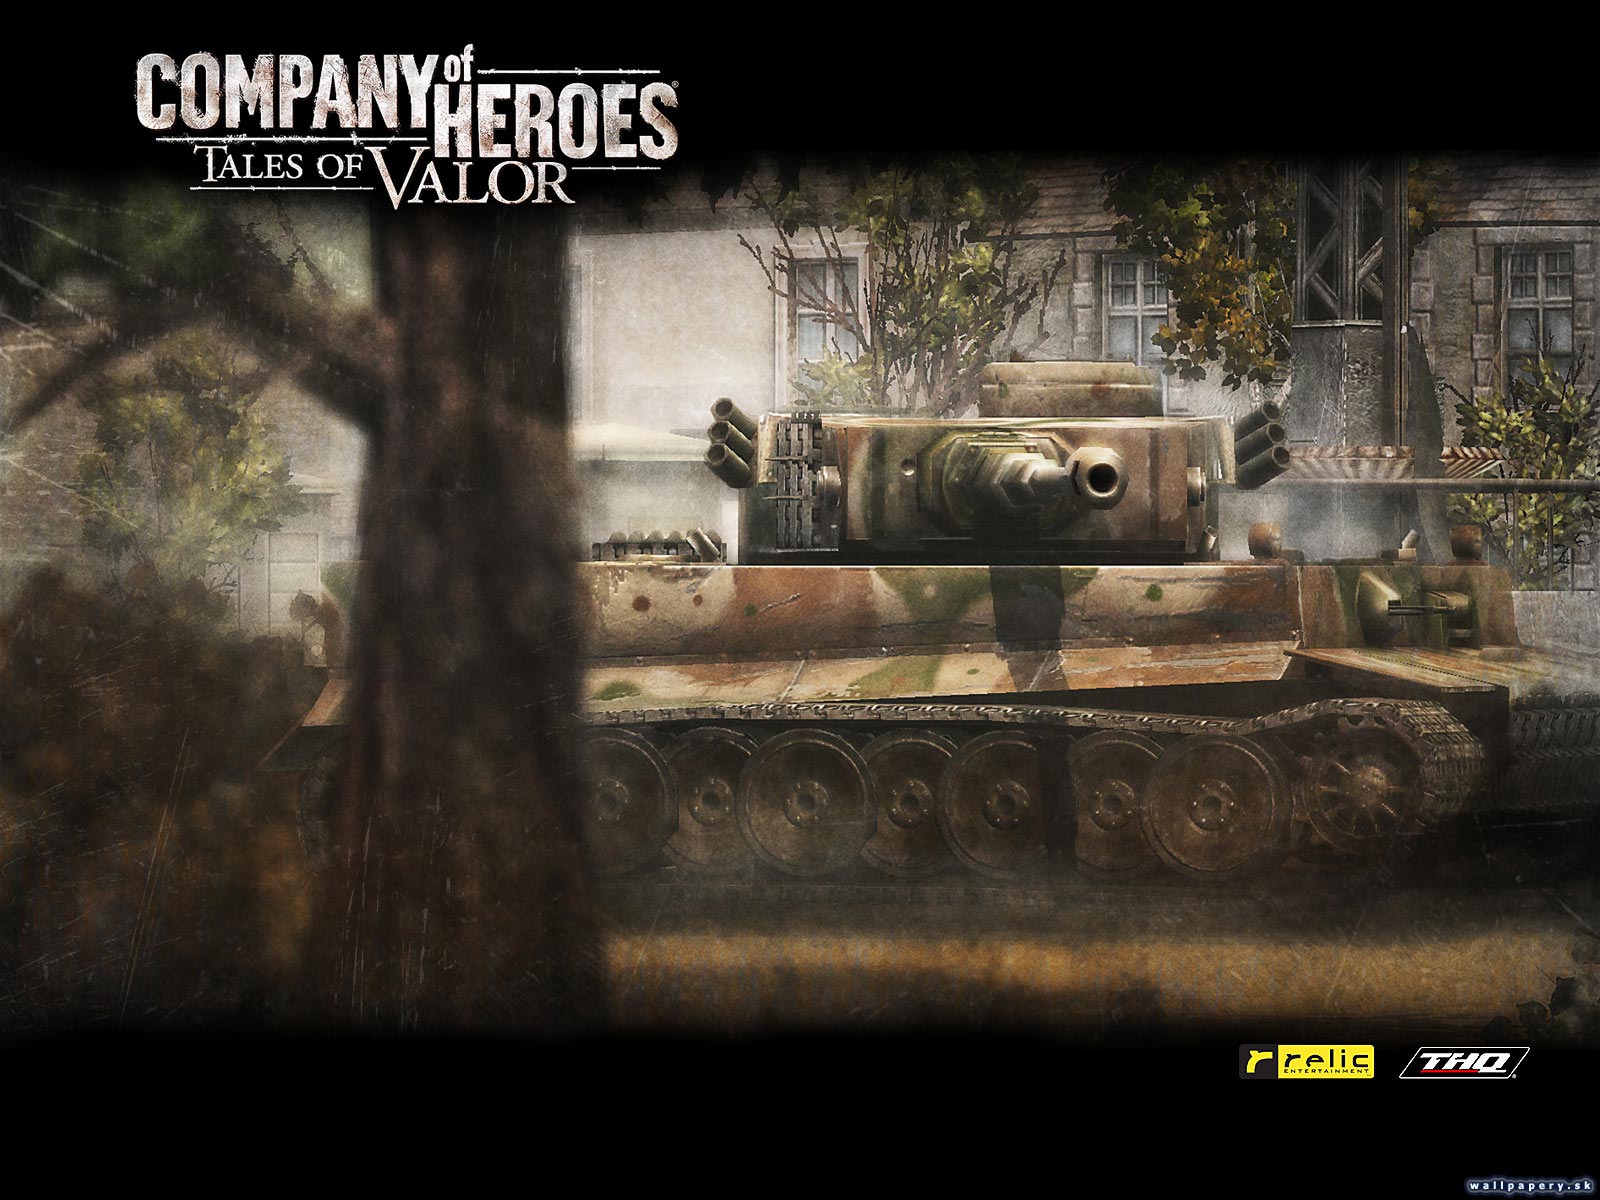 Company of Heroes: Tales of Valor - wallpaper 1